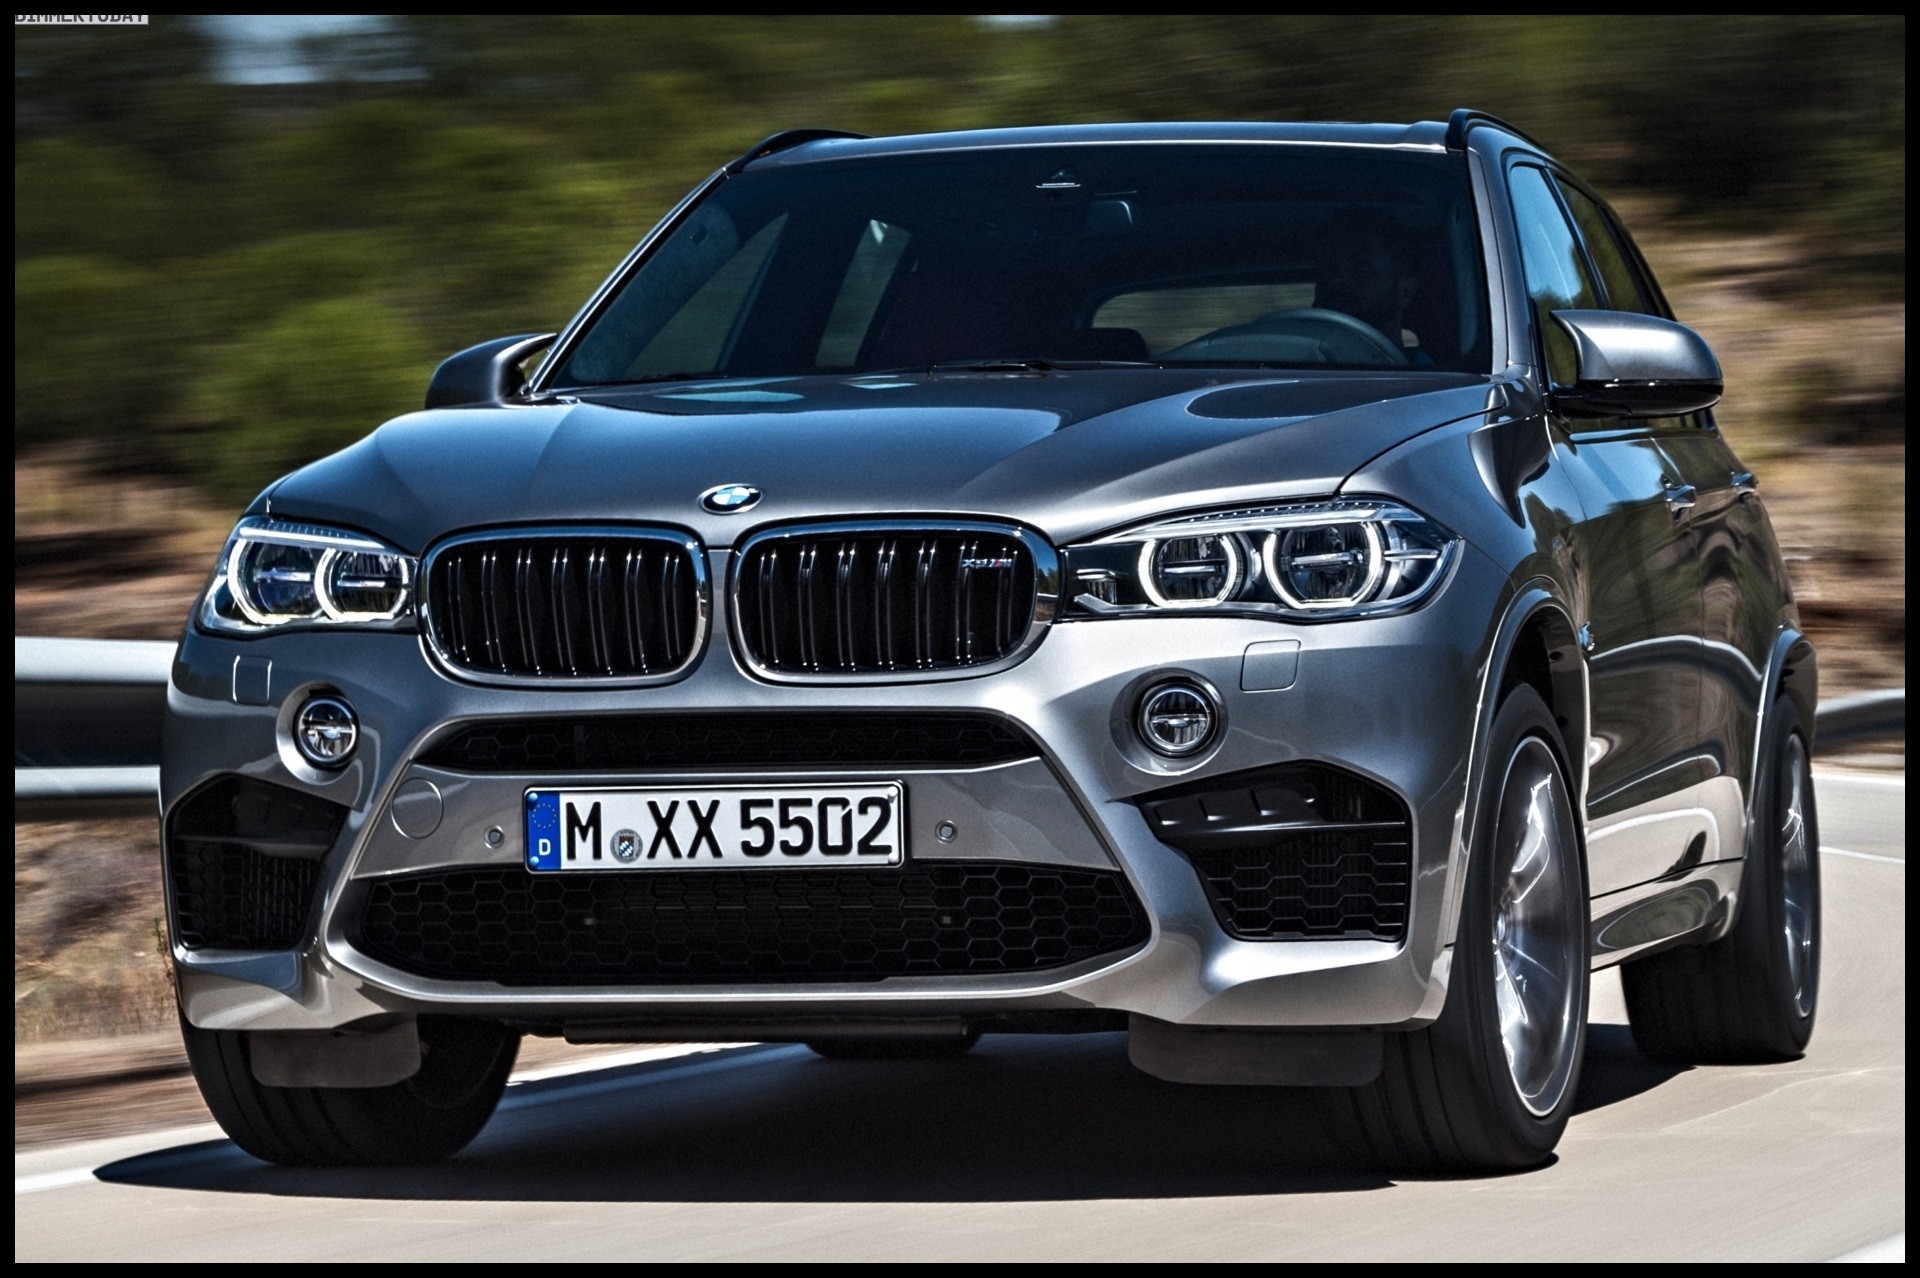 2018 Bmw X5 Launch Best 2017 Bmw X5 Just A Bit Current Changes and Pricing